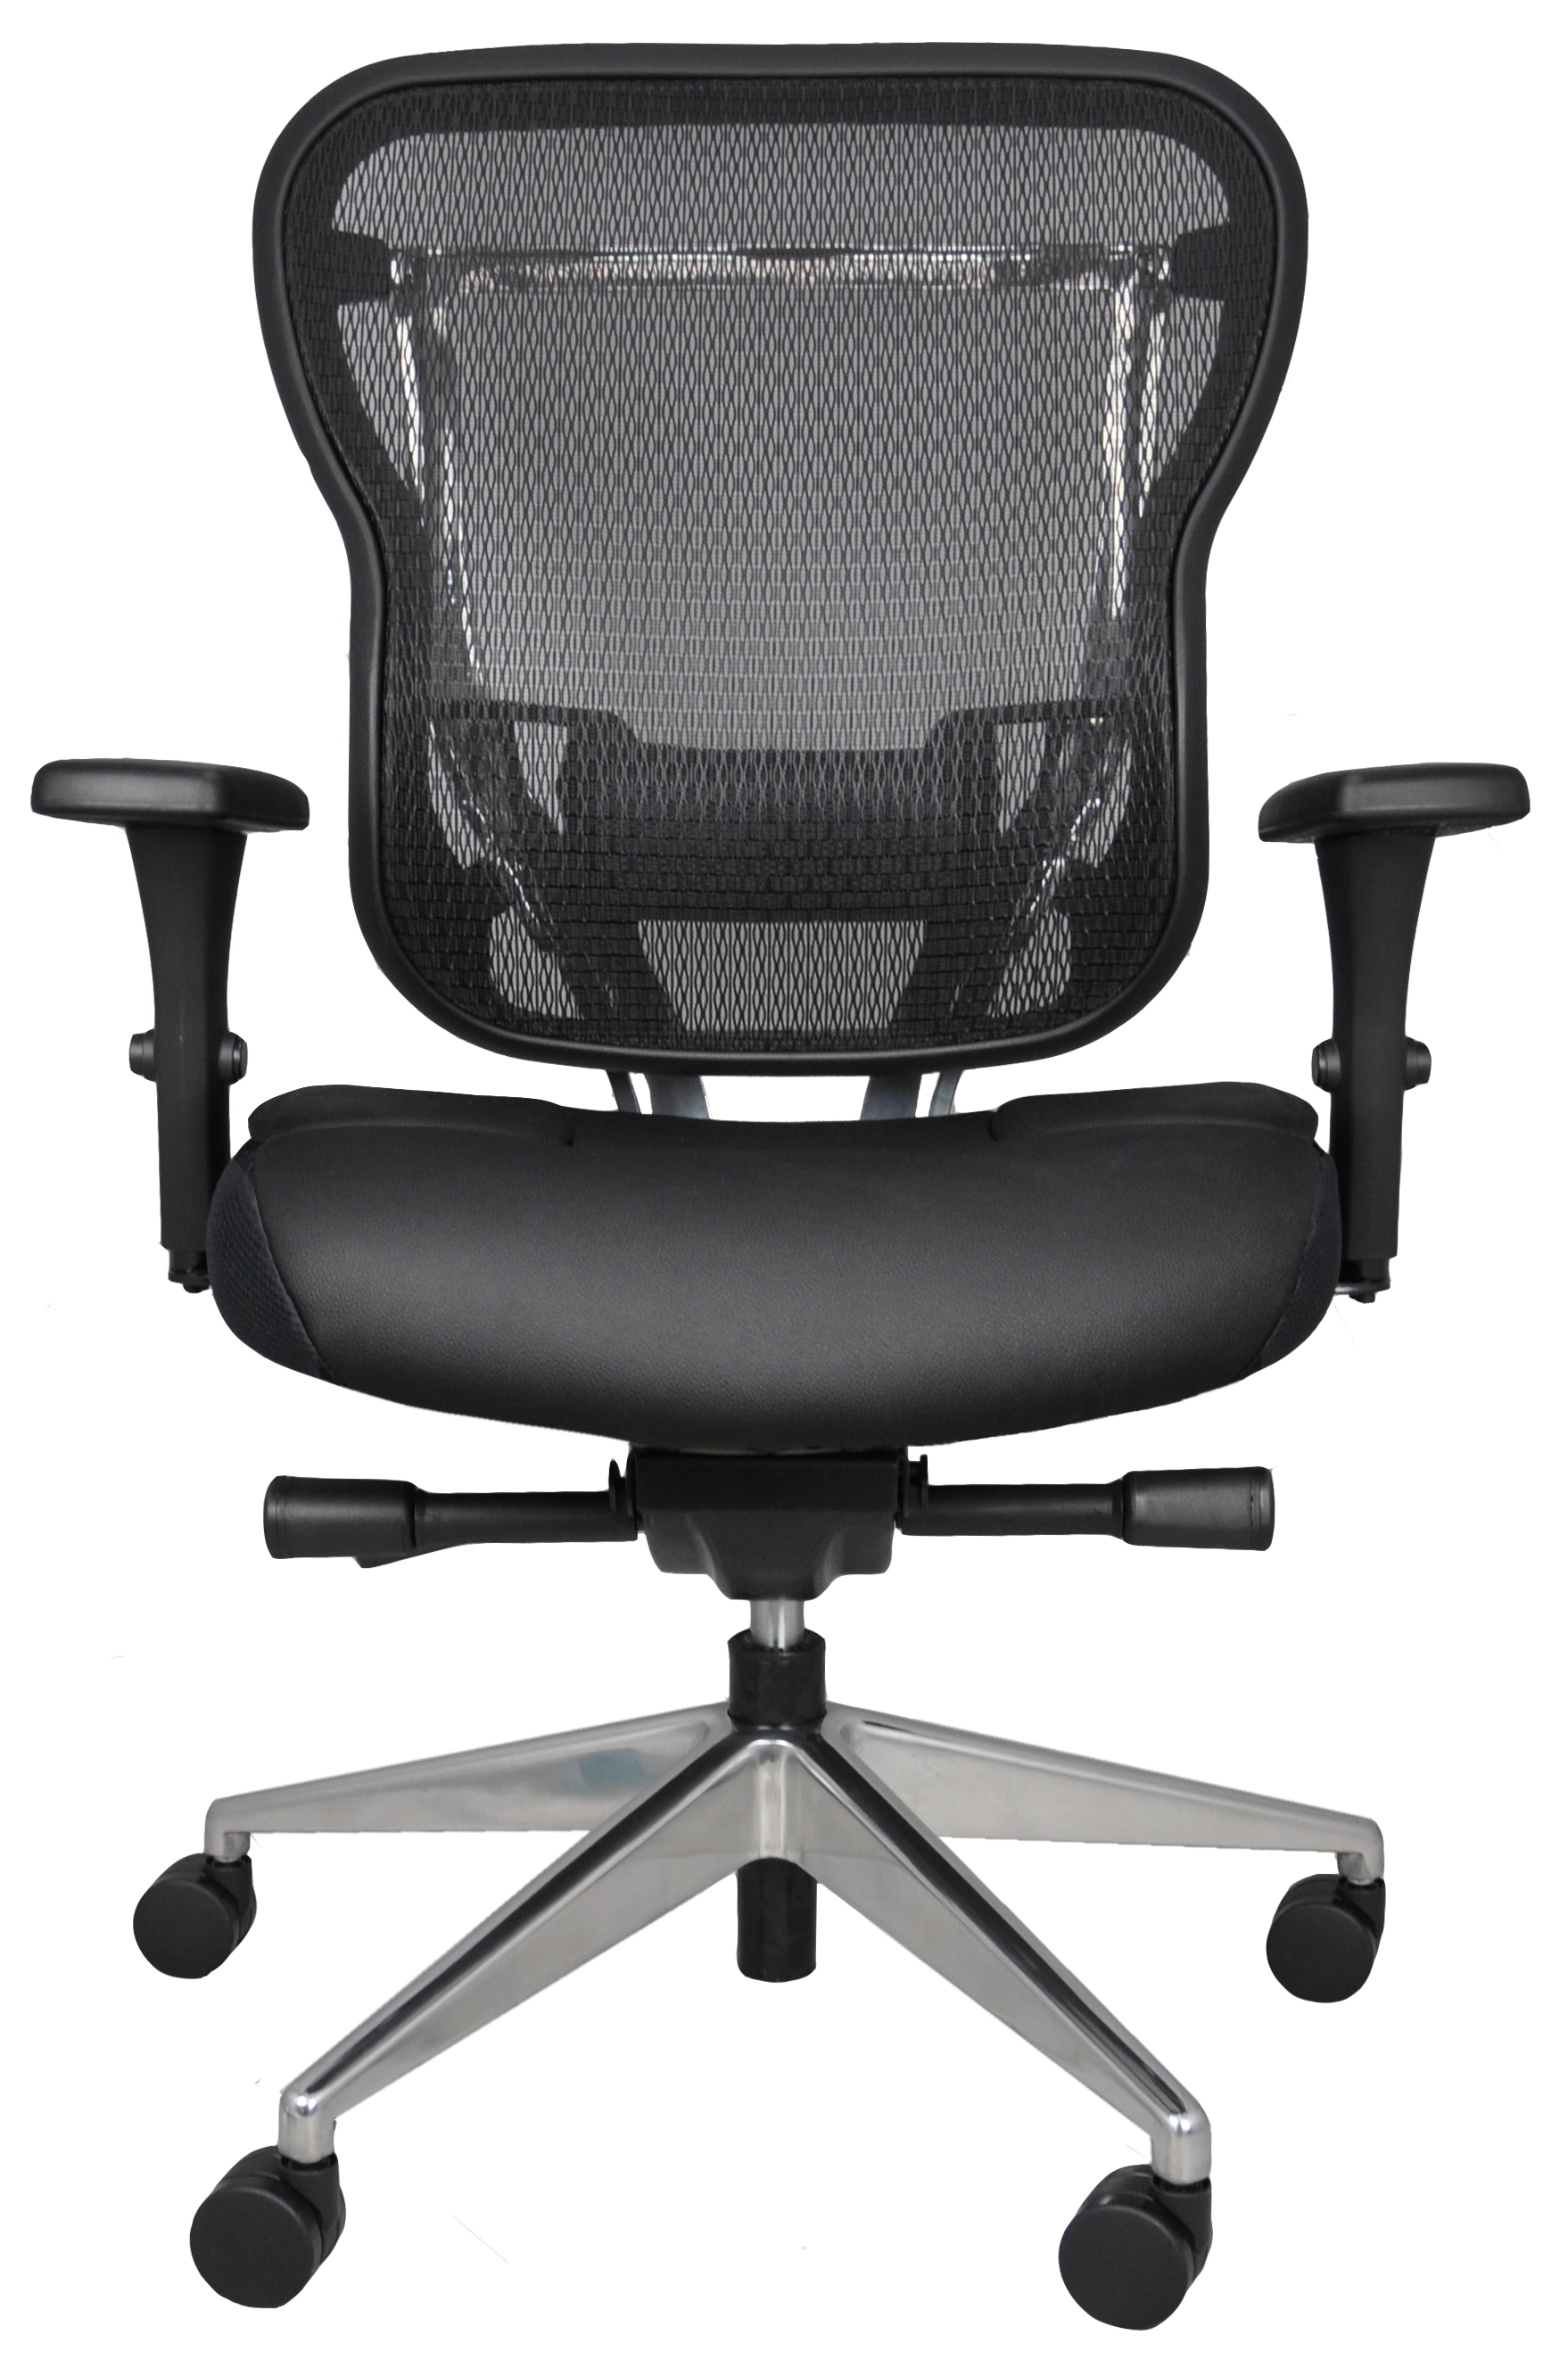 Rika Ergonomic Office Chair With Mesh Back And Leather Seat